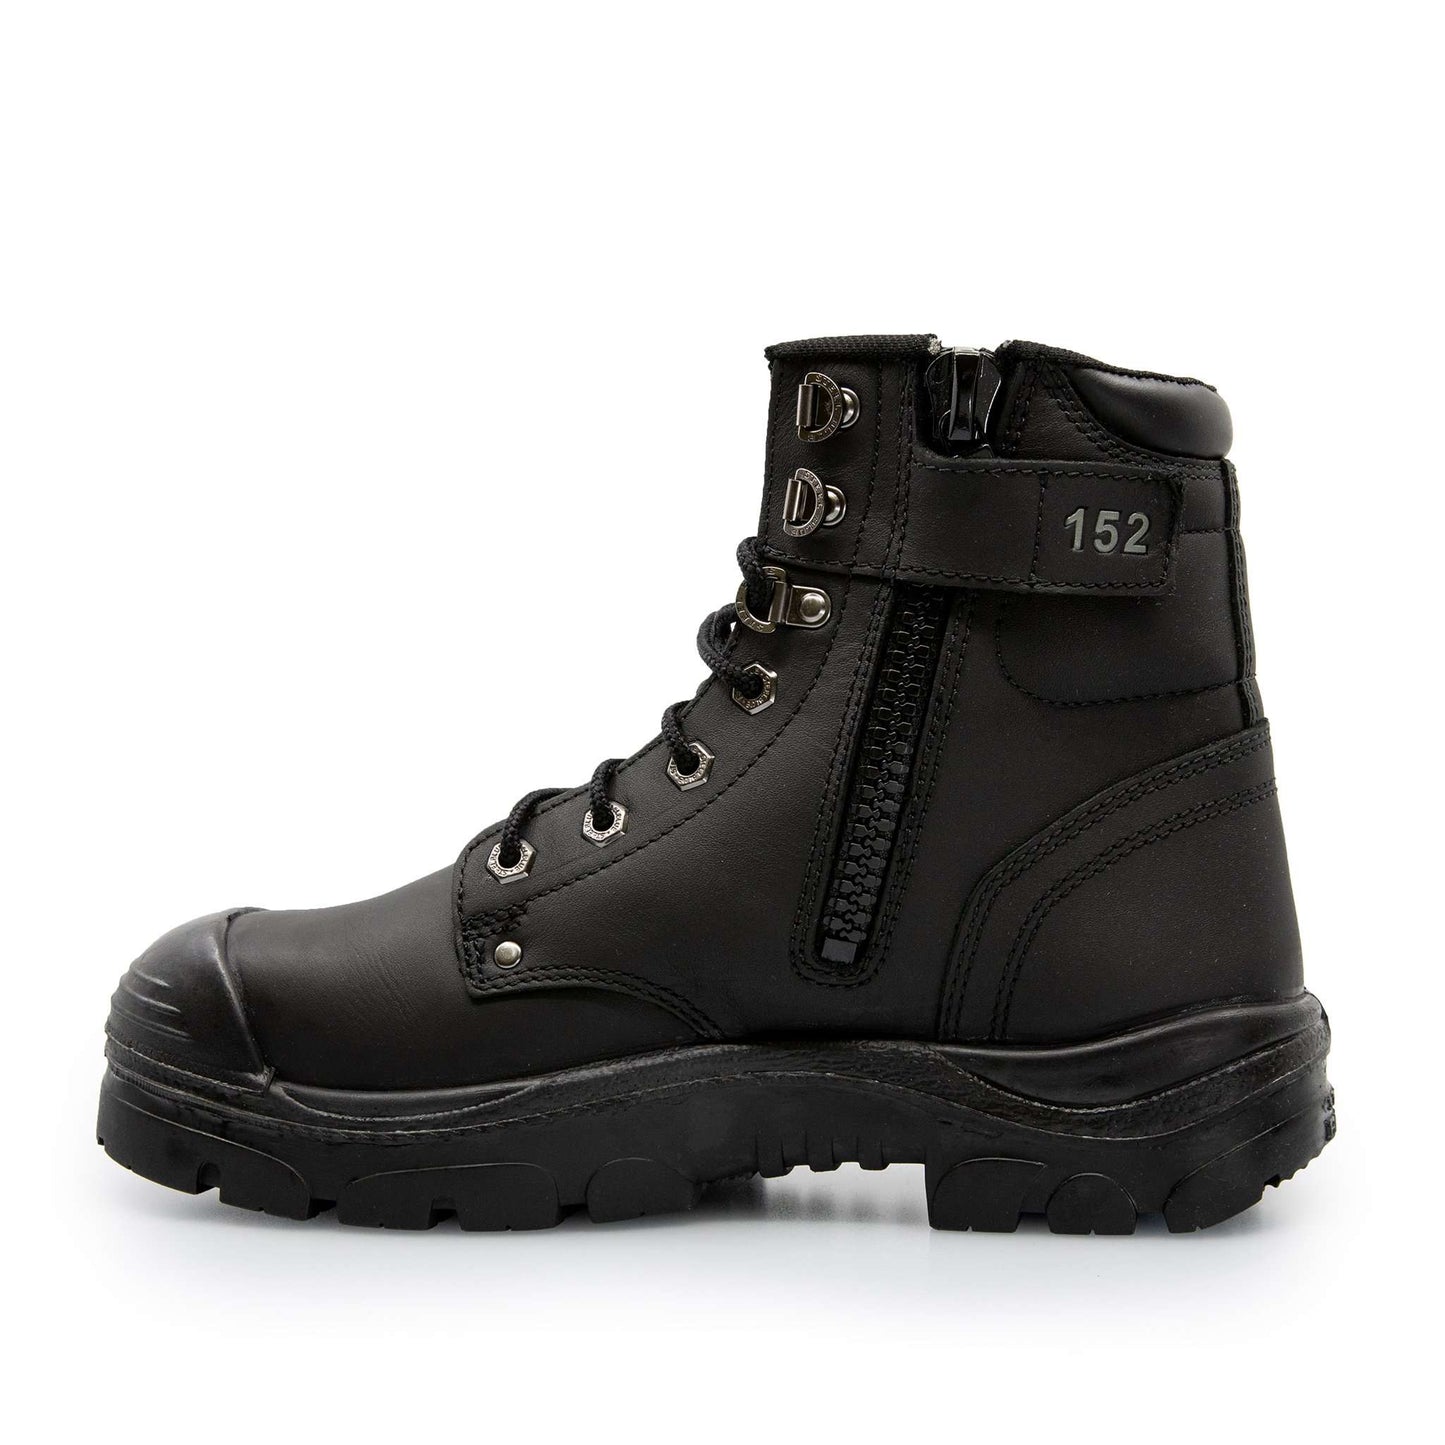  STEEL BLUE® WORK BOOTS ONLINE - BLACK COLOUR, OUTER SIDE